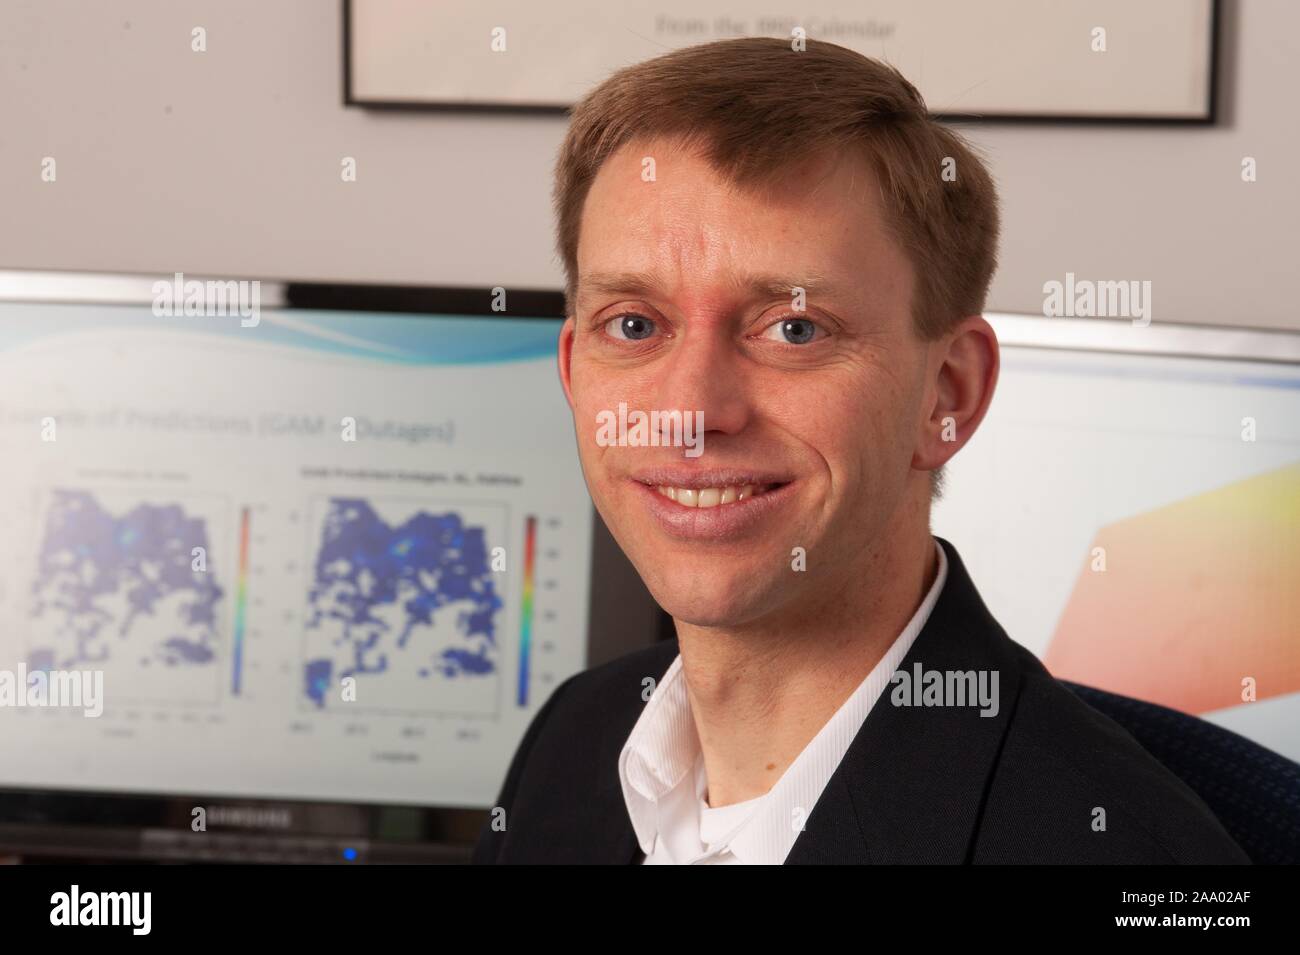 Close-up portrait shot of Researcher Seth Guikema, facing the camera and smiling, at the Johns Hopkins University, Baltimore, Maryland, March 4, 2009. From the Homewood Photography Collection. () Stock Photo